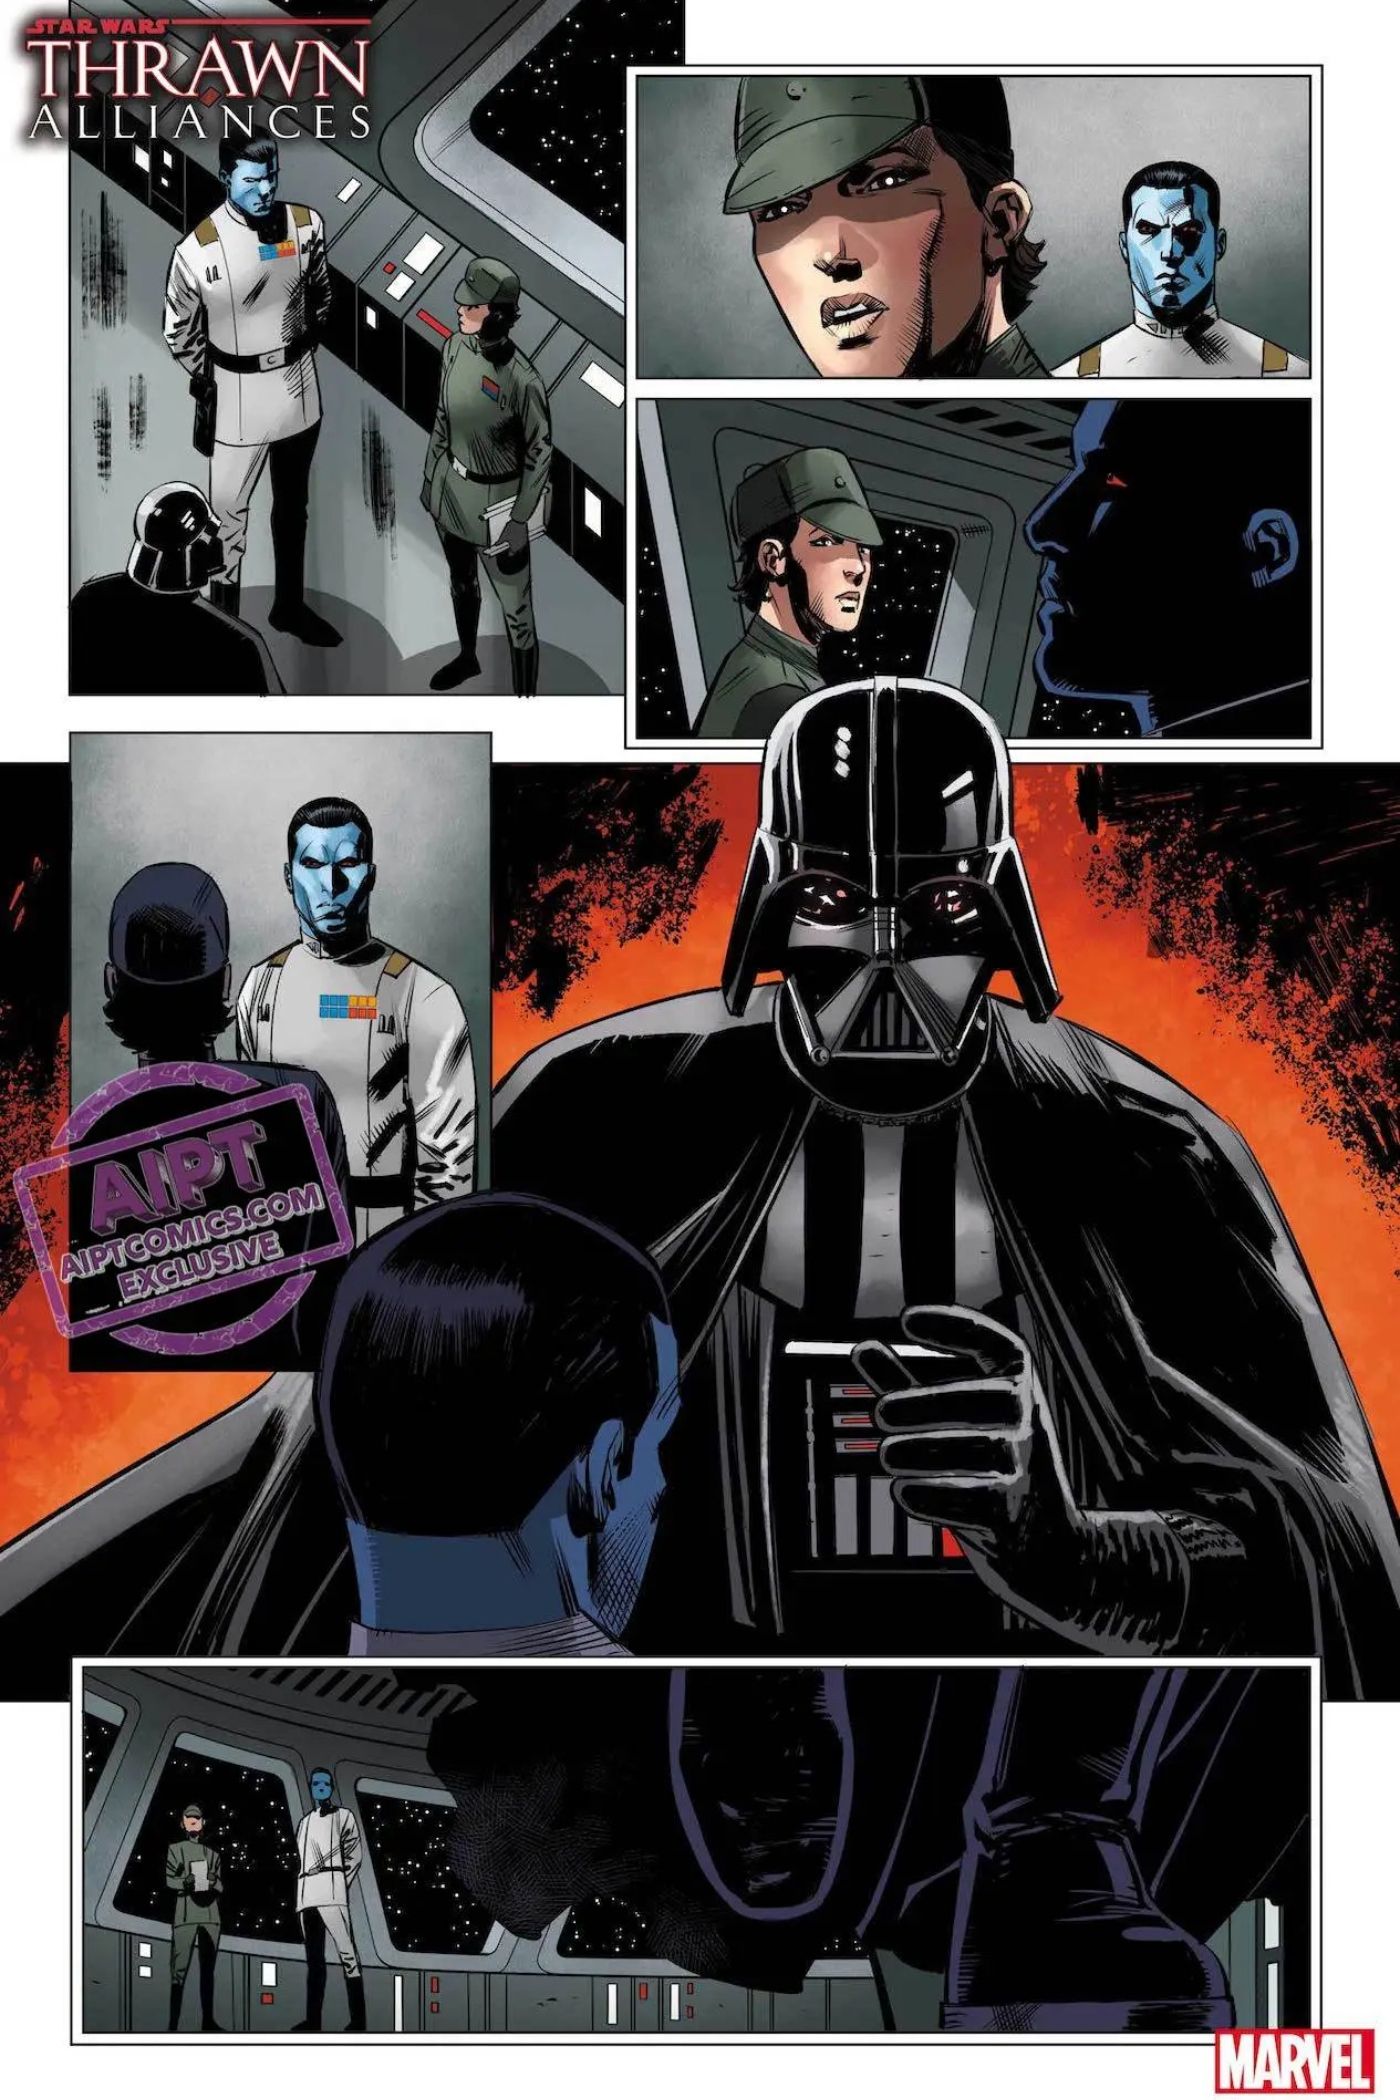 Star Wars: Thrawn Alliances #1 Preview page 3.